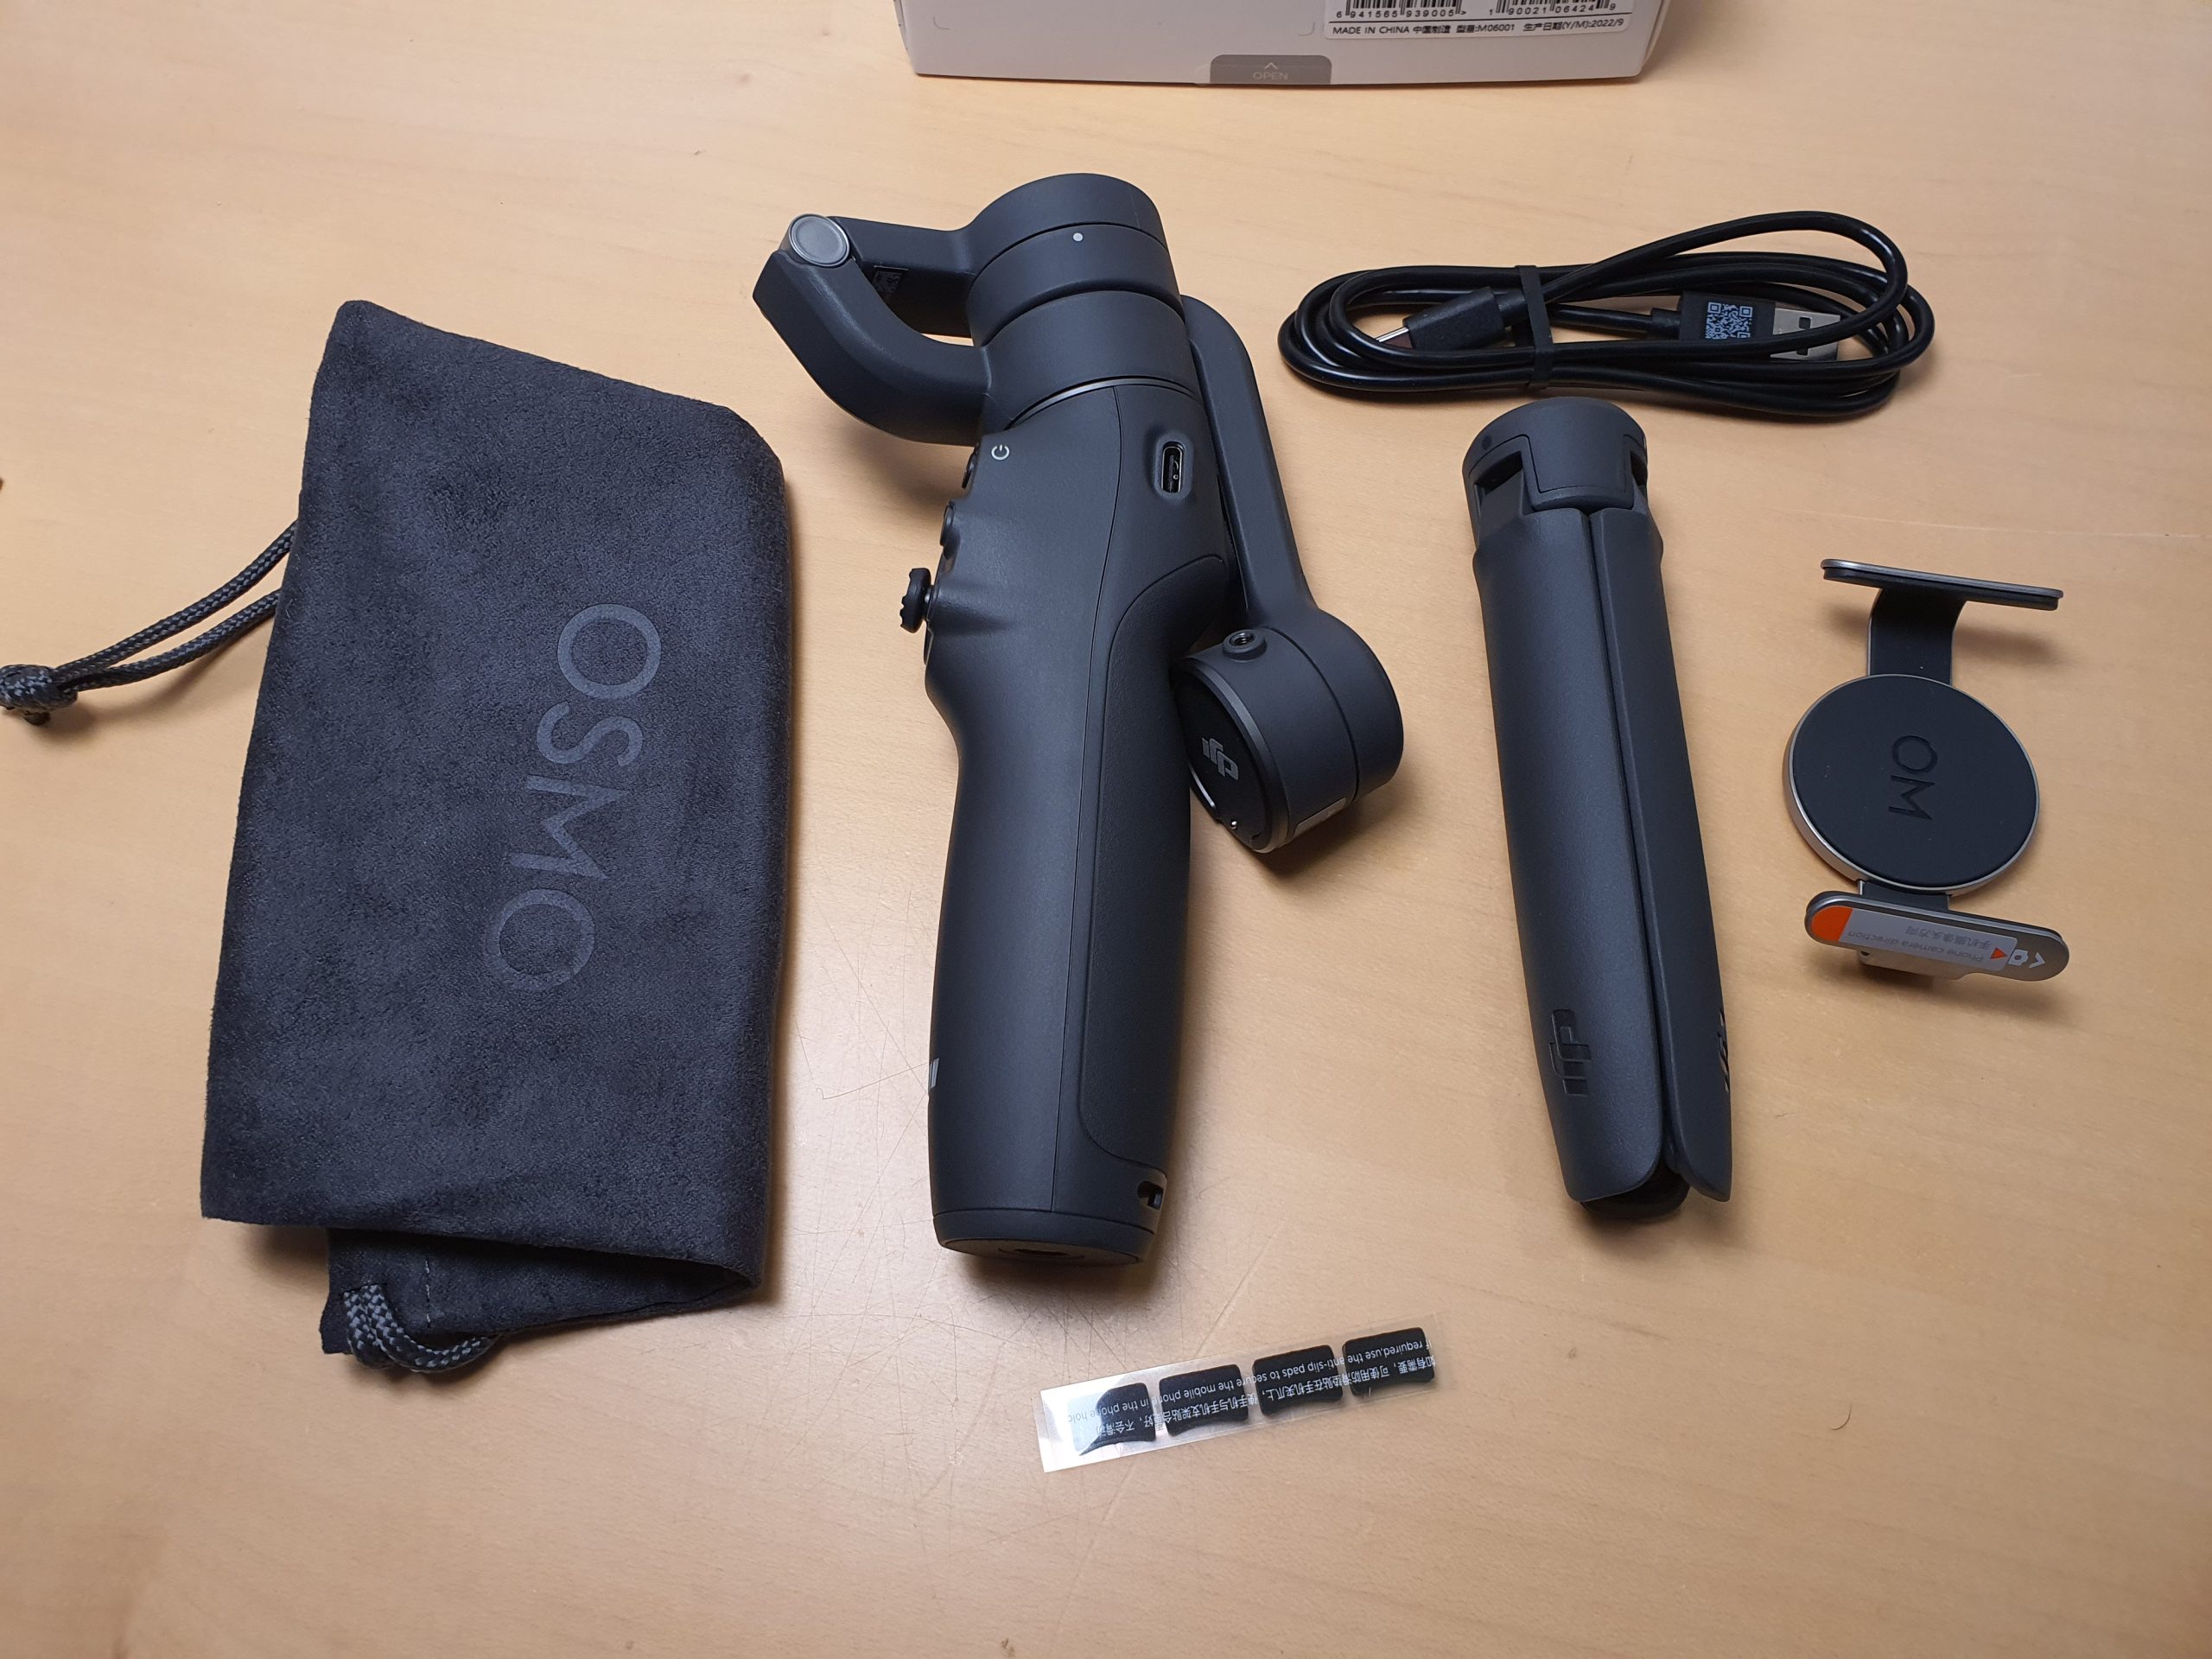 Test: Osmo Mobile 6 Gimbal | eReviews.dk